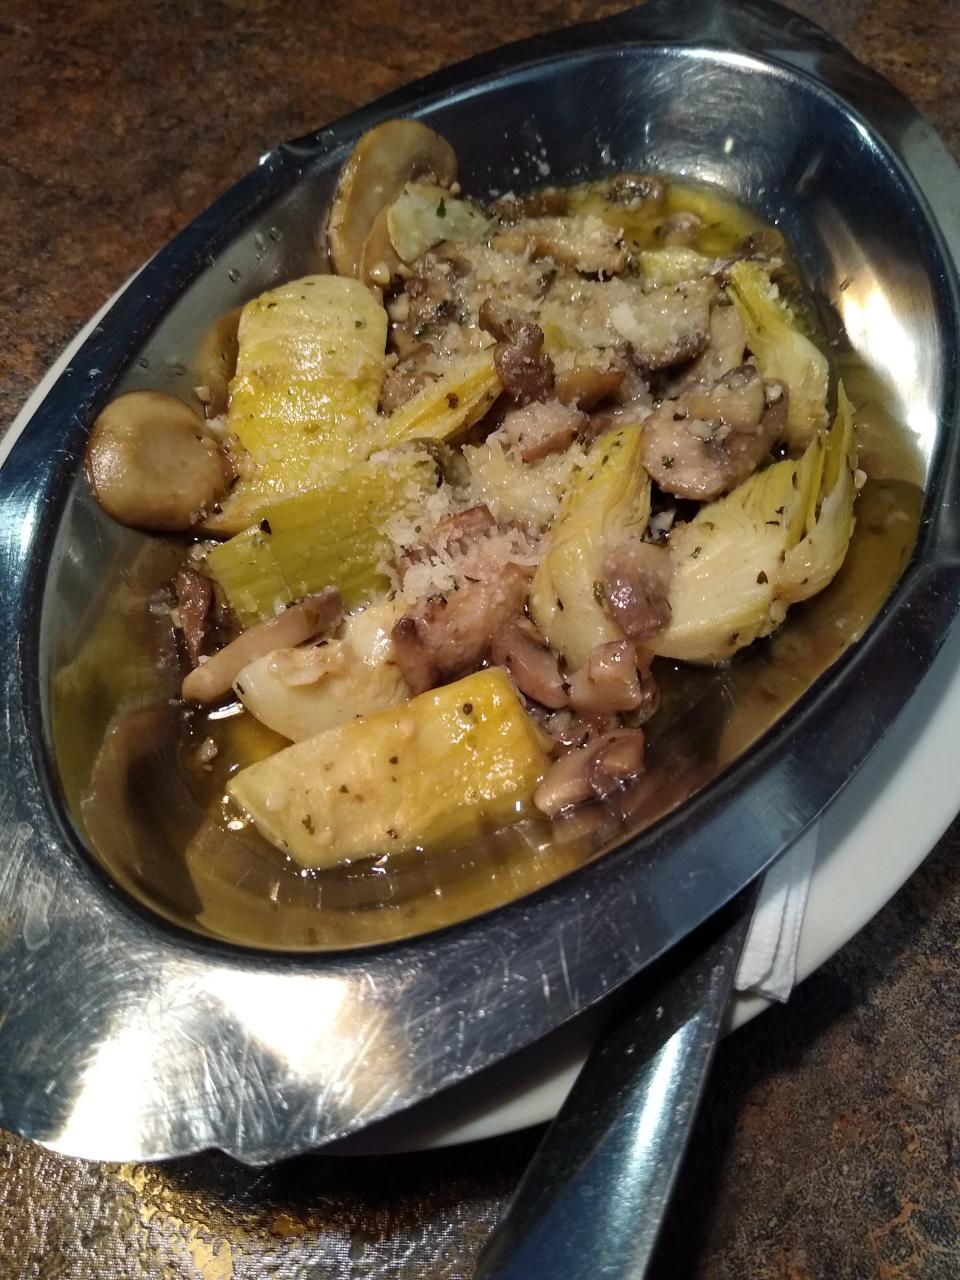 Casa D’Angelo’s artichoke appetizer features artichokes and mushrooms in a garlic wine sauce topped with a sprinkle of Parmesan cheese.